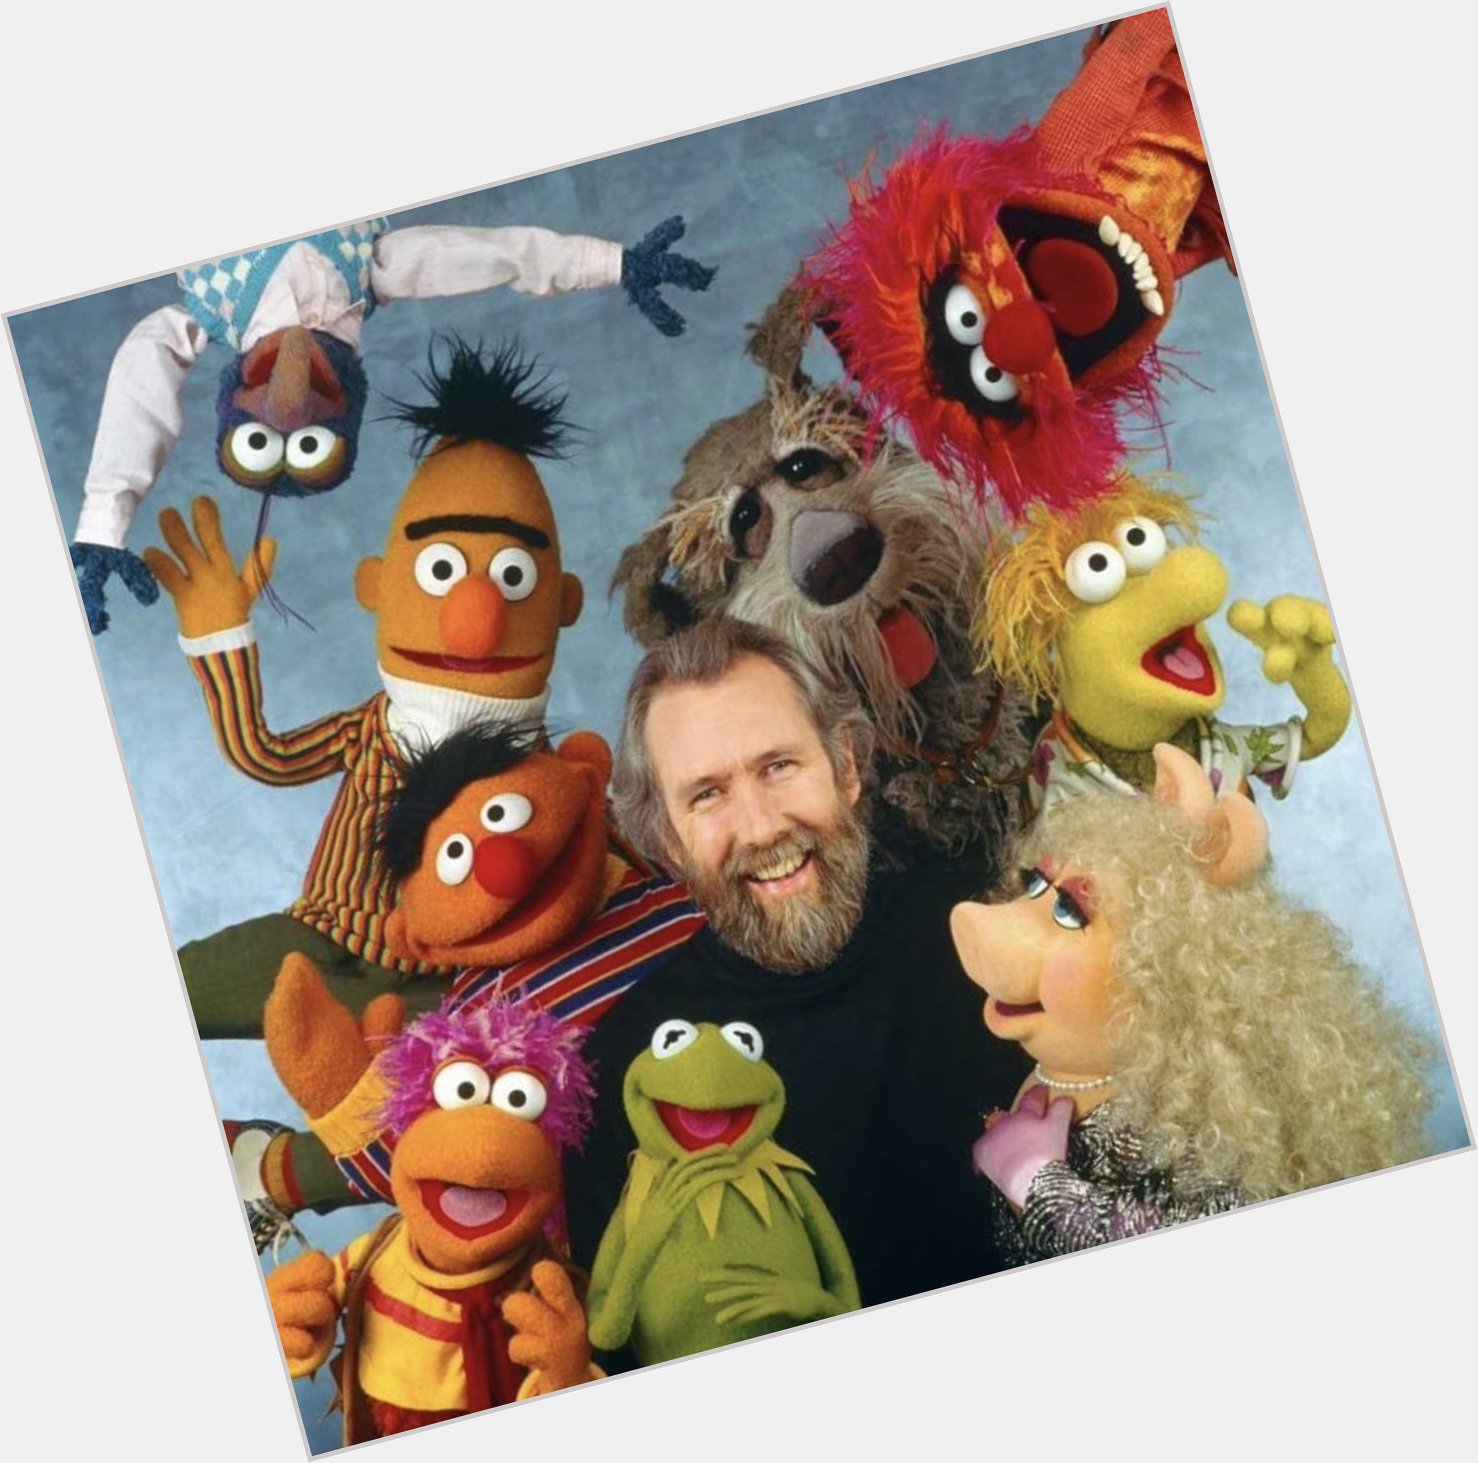 Happy birthday Jim Henson. I hope you knew how much light you brought into the world. 